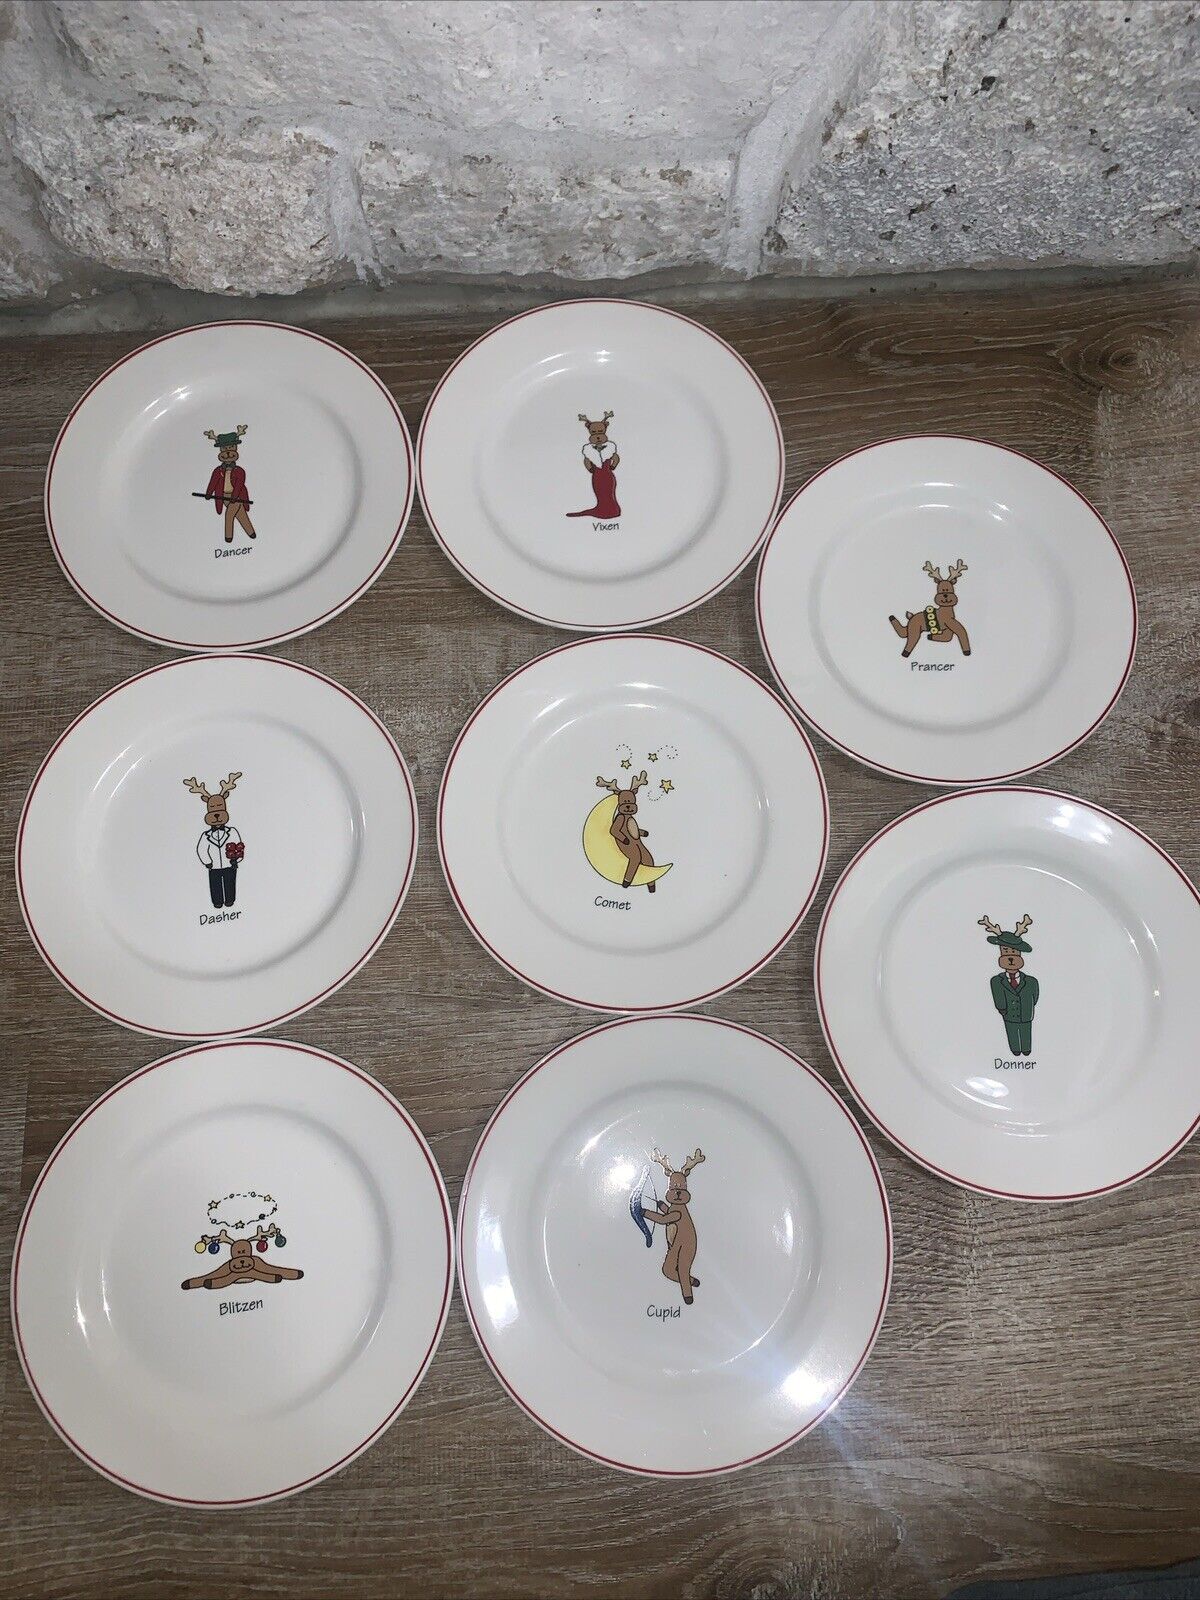 Set 8 Santa’s Reindeers 8.25” Plates in Excellent Used Condition LTD Commodities